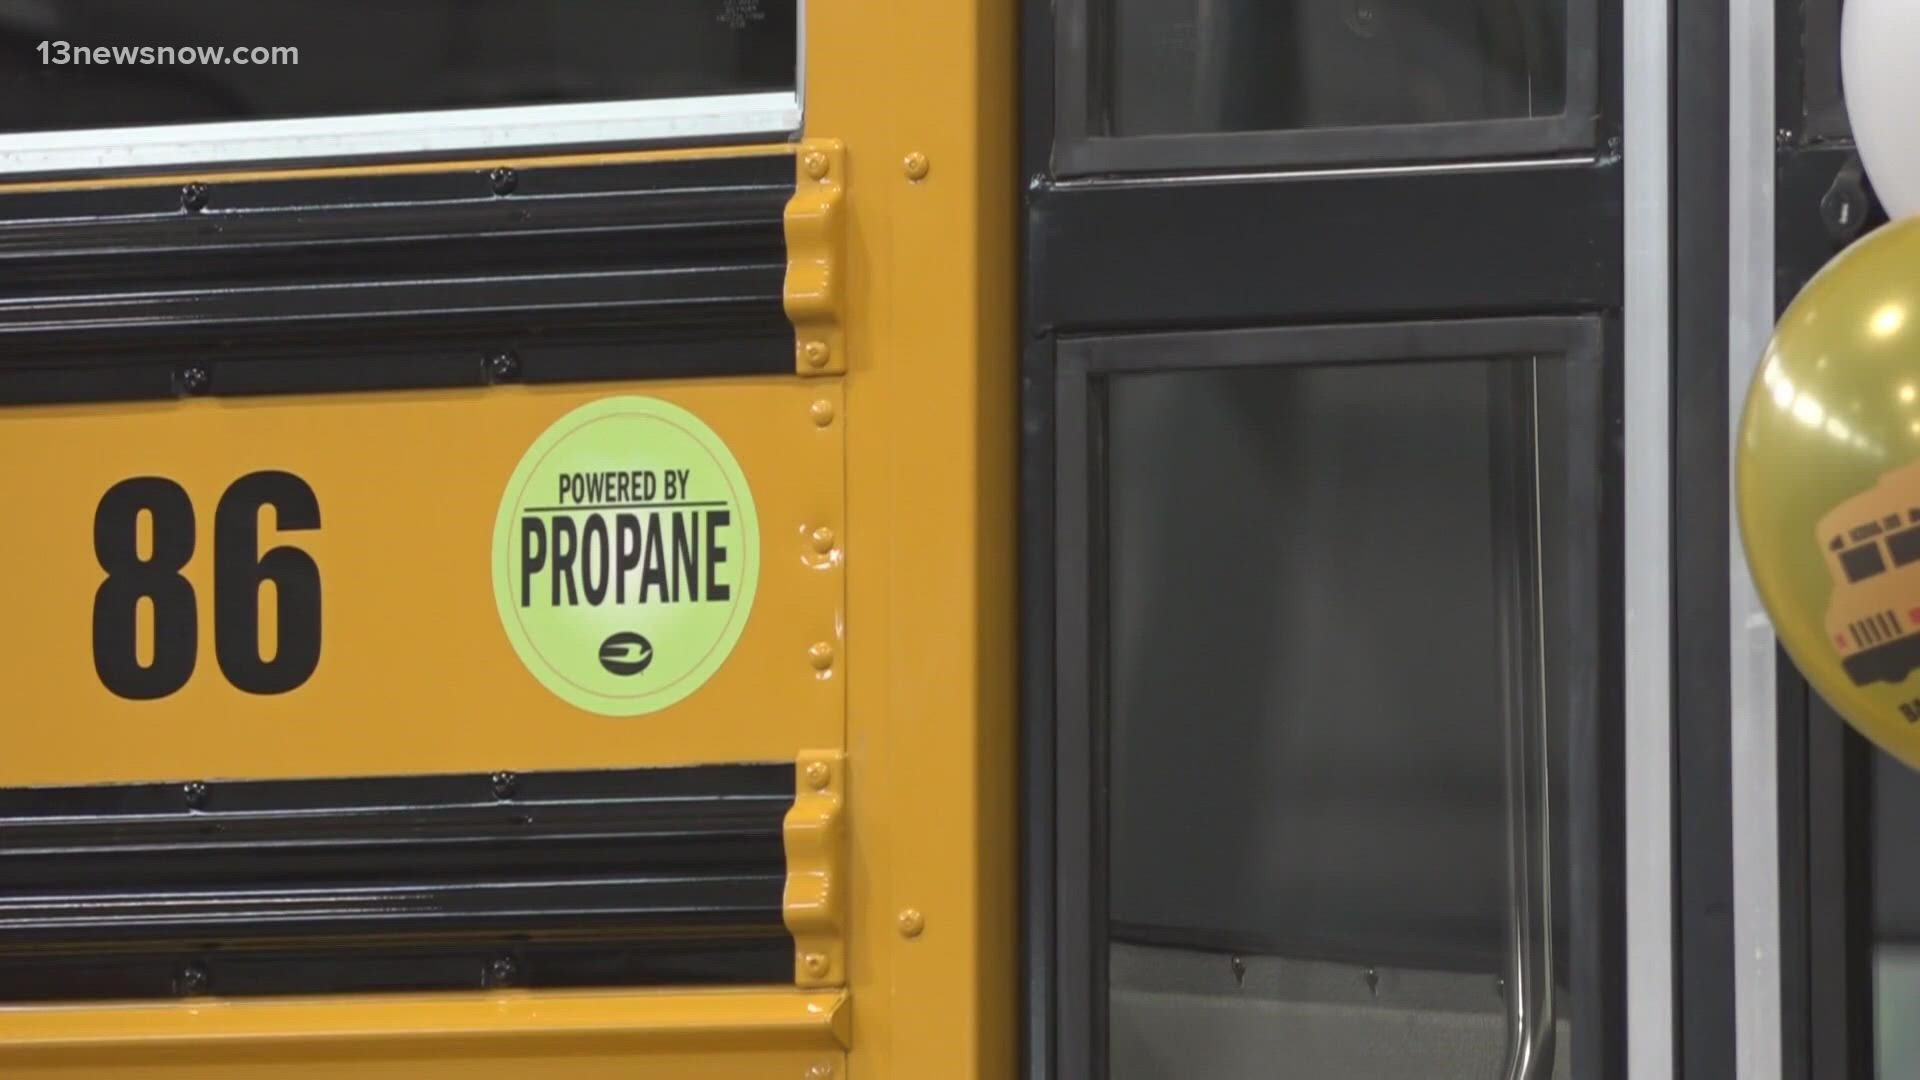 School leaders started replacing the diesel bus fleet five years ago. The district is switching to more cost-effective, clean-energy propane buses.